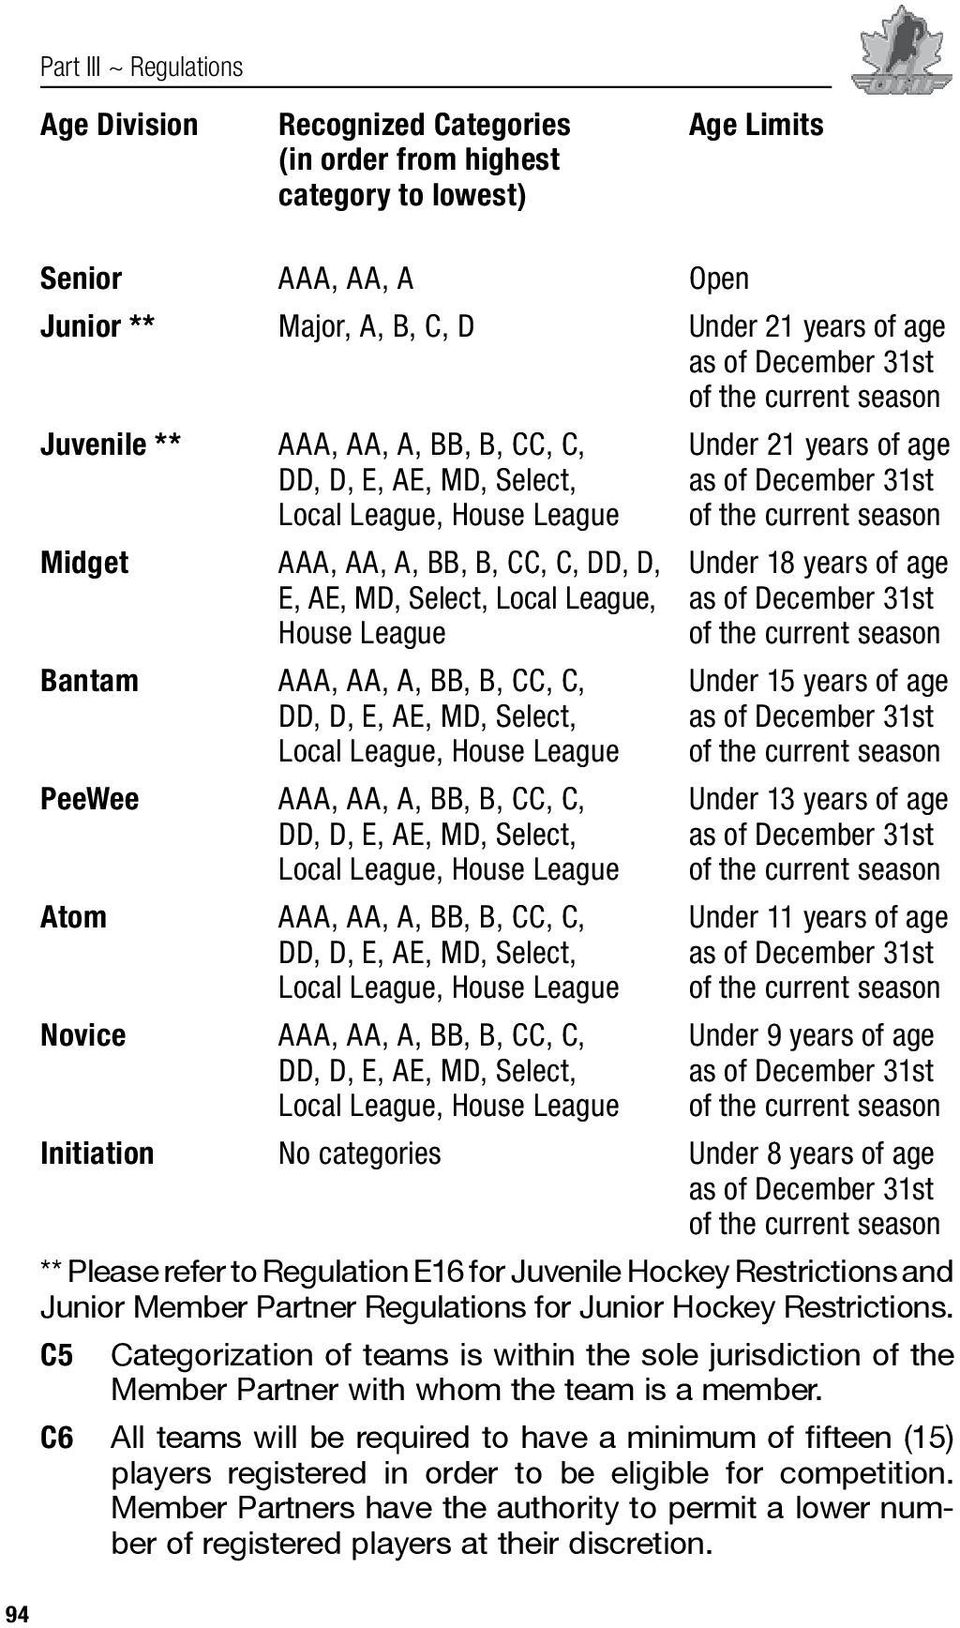 AAA, AA, A, BB, B, CC, C, DD, D, Under 18 years of age E, AE, MD, Select, Local League, as of December 31st House League of the current season Bantam AAA, AA, A, BB, B, CC, C, Under 15 years of age